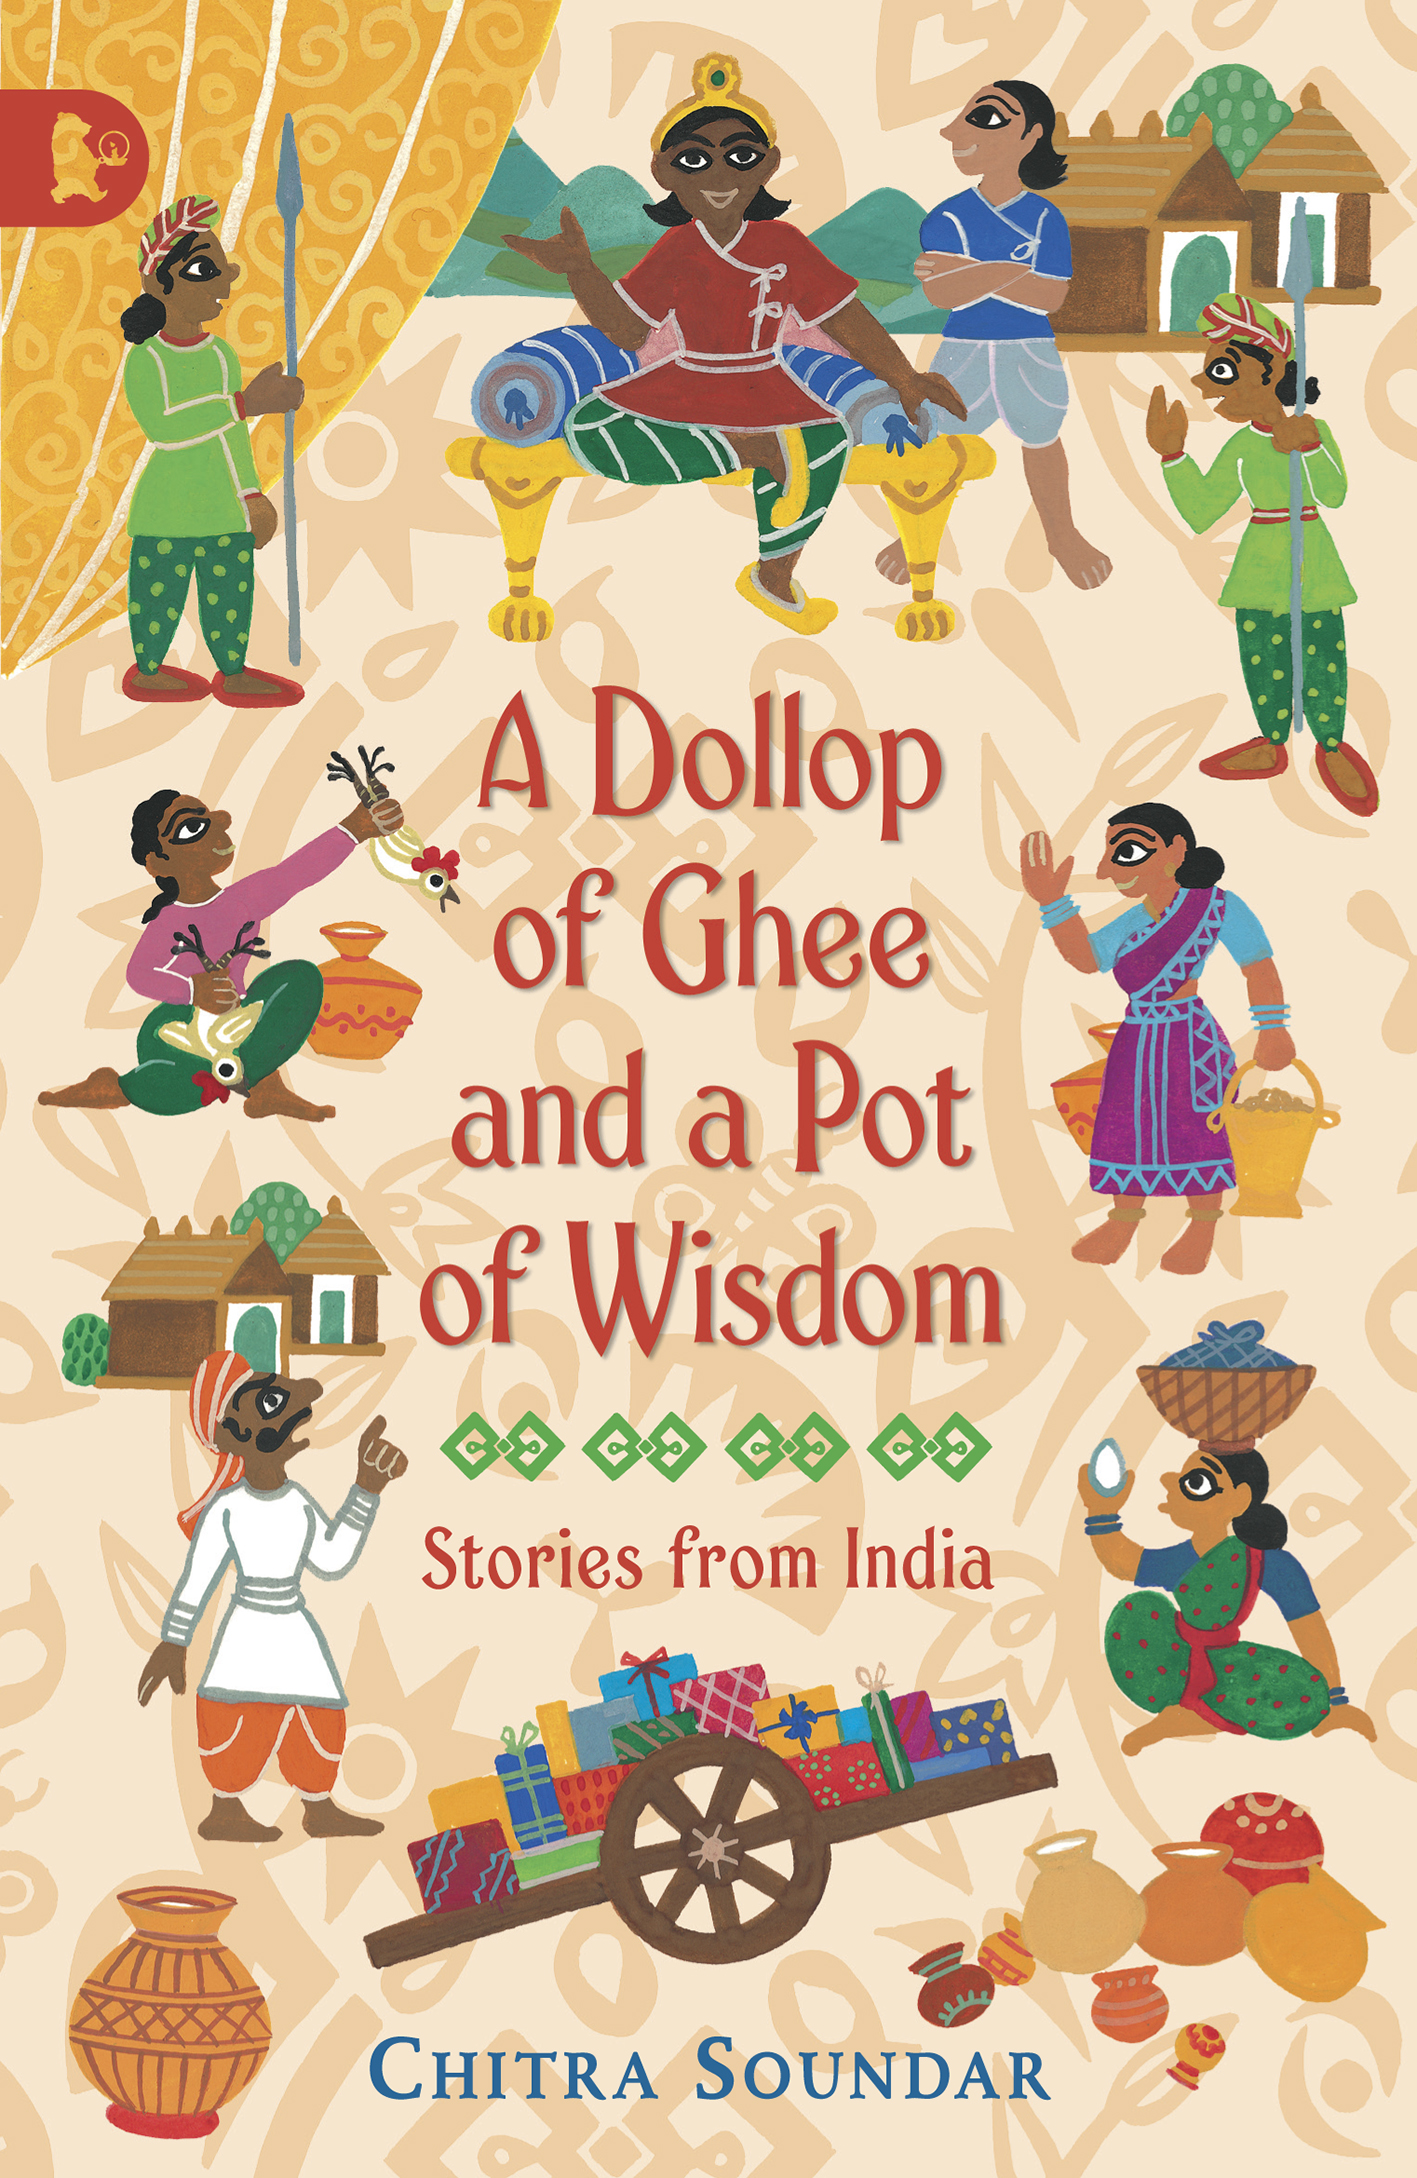 A-Dollop-of-Ghee-and-a-Pot-of-Wisdom